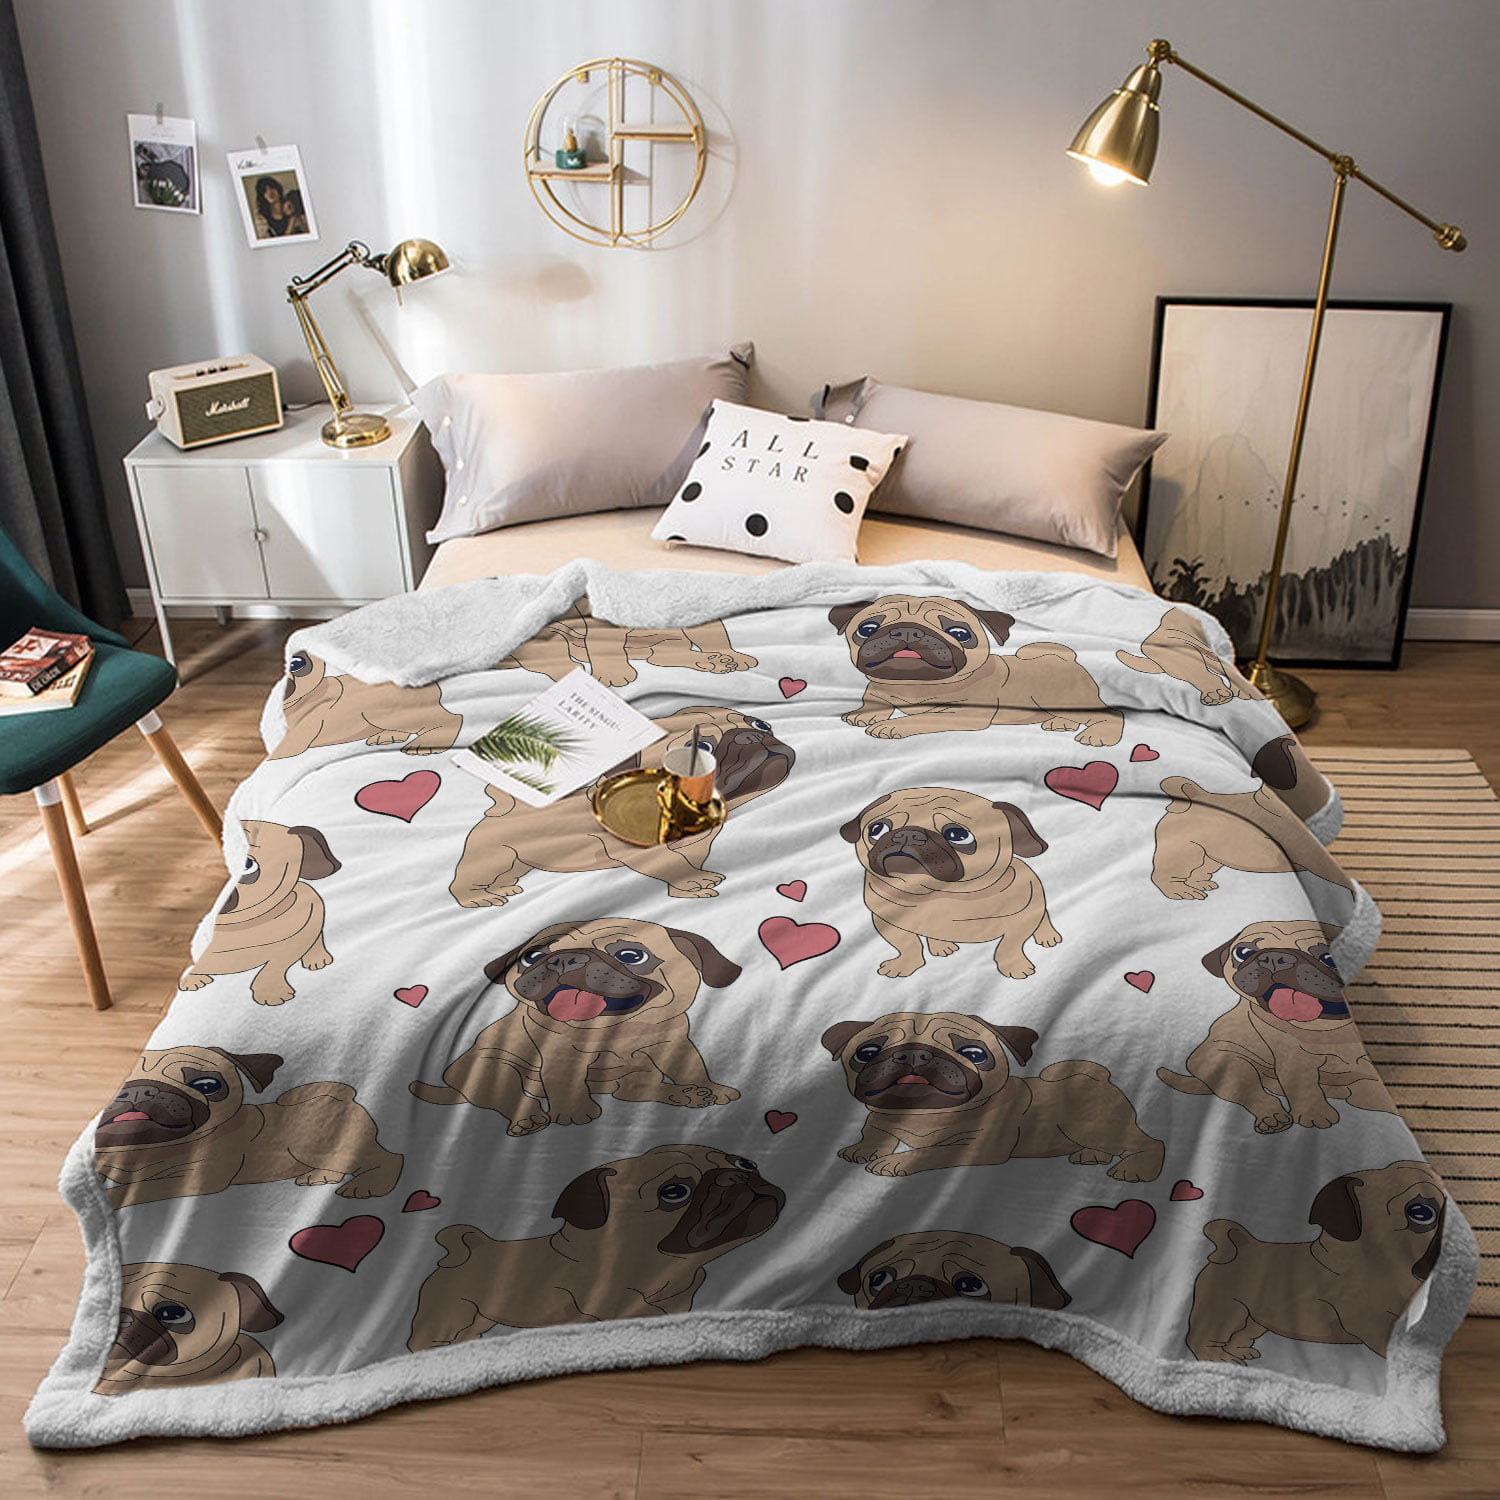 Throw Blanket Sloth Bed Throws Flannel Fleece Blanket Lightweight All Season Bed Quilts Bedding Carpet Home Decor for Couch Bed Sofa Chair